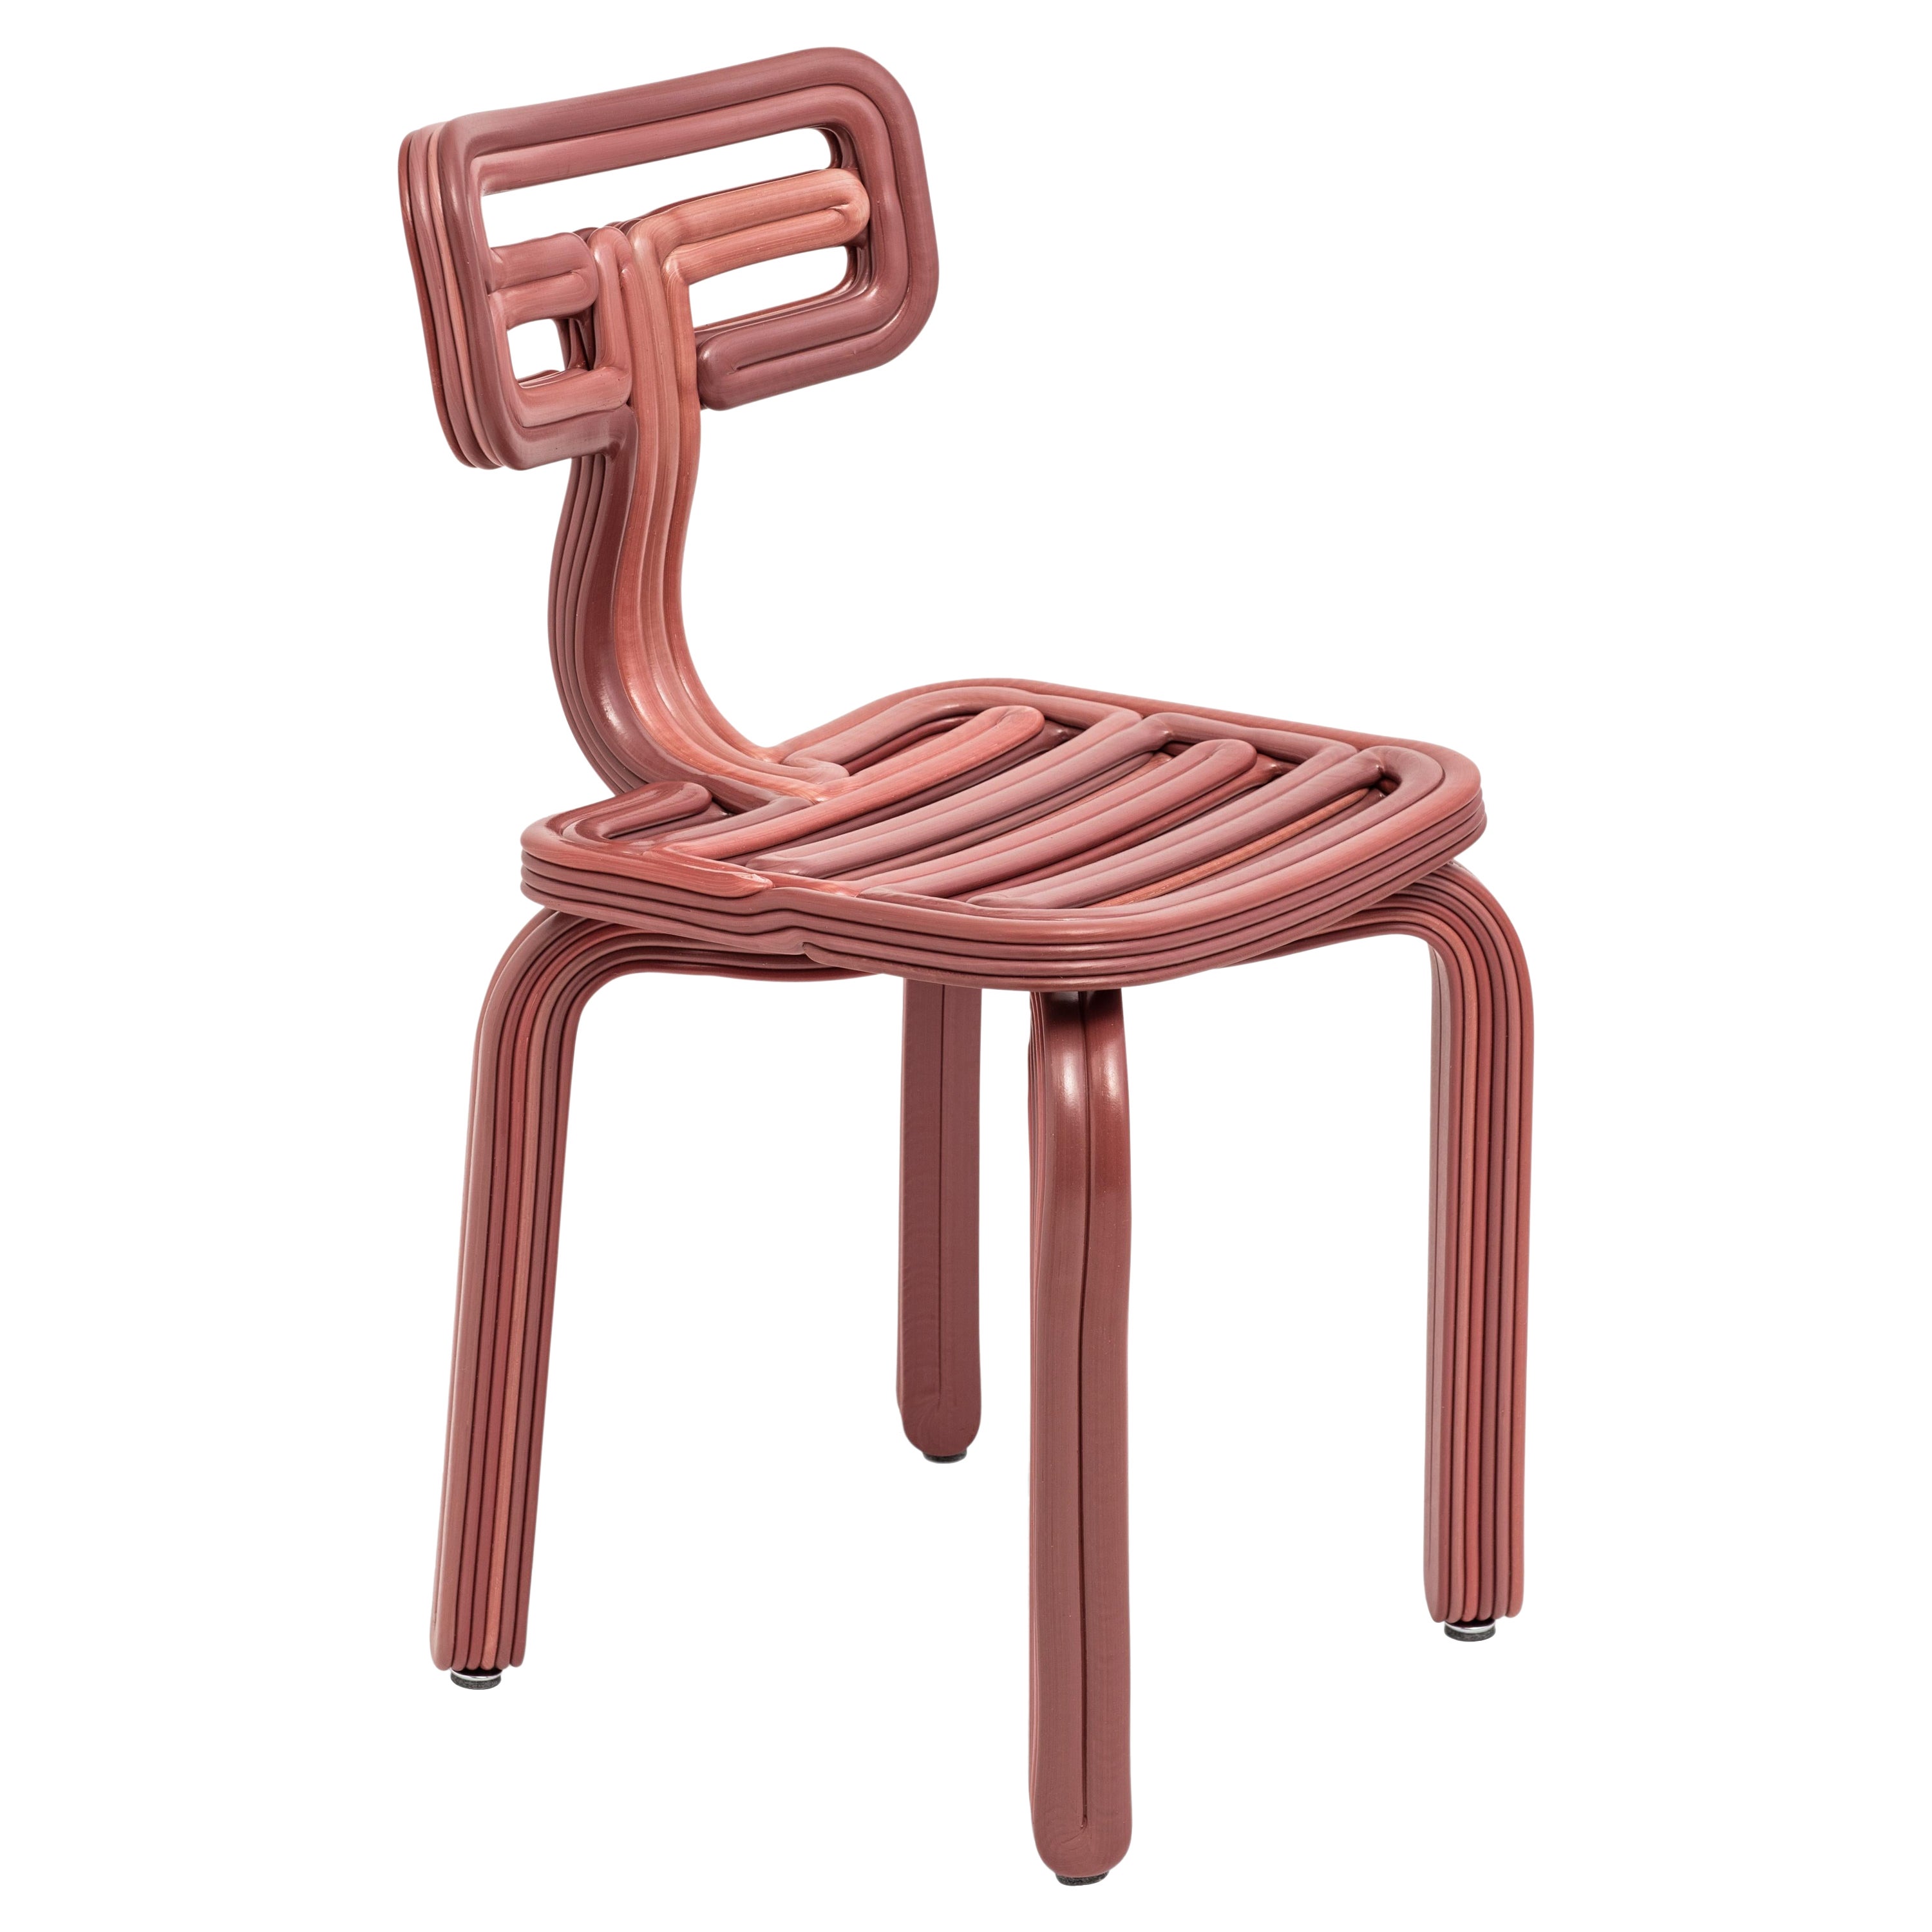 Chubby Chair in Brick 3D Printed recycled plastic by KOOIJ